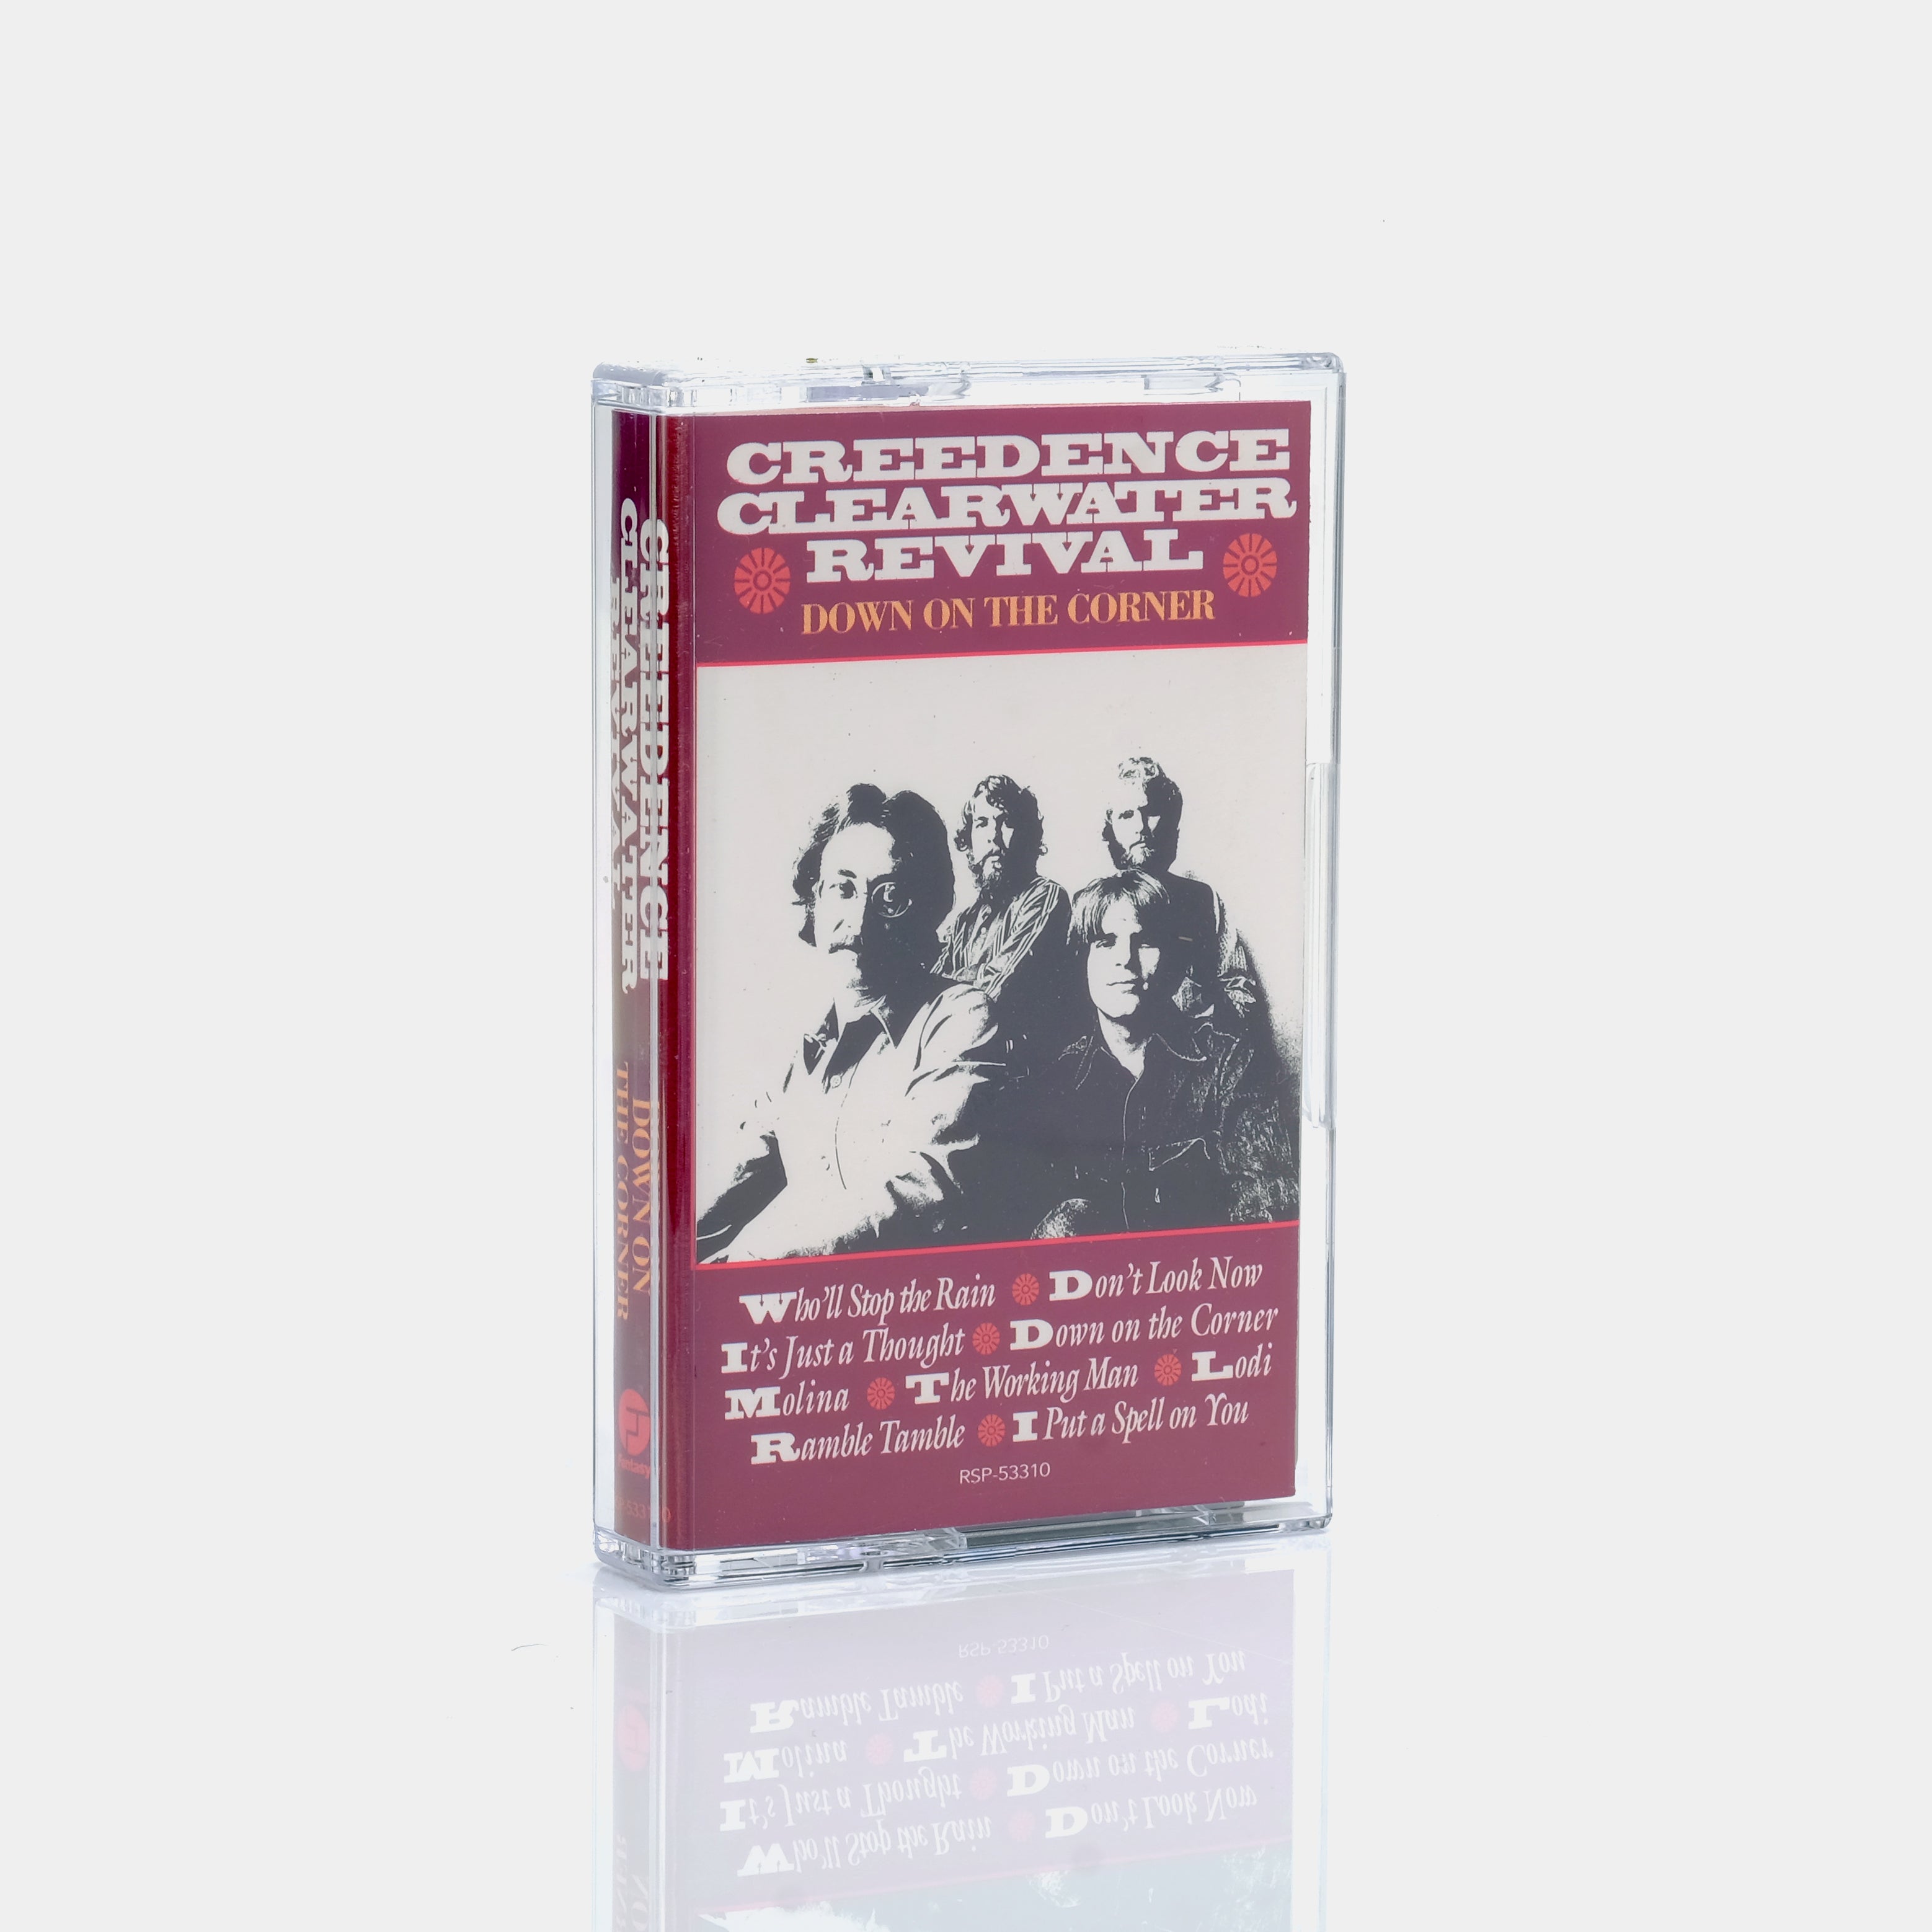 Creedence Clearwater Revival - Down on the Corner Cassette Tape